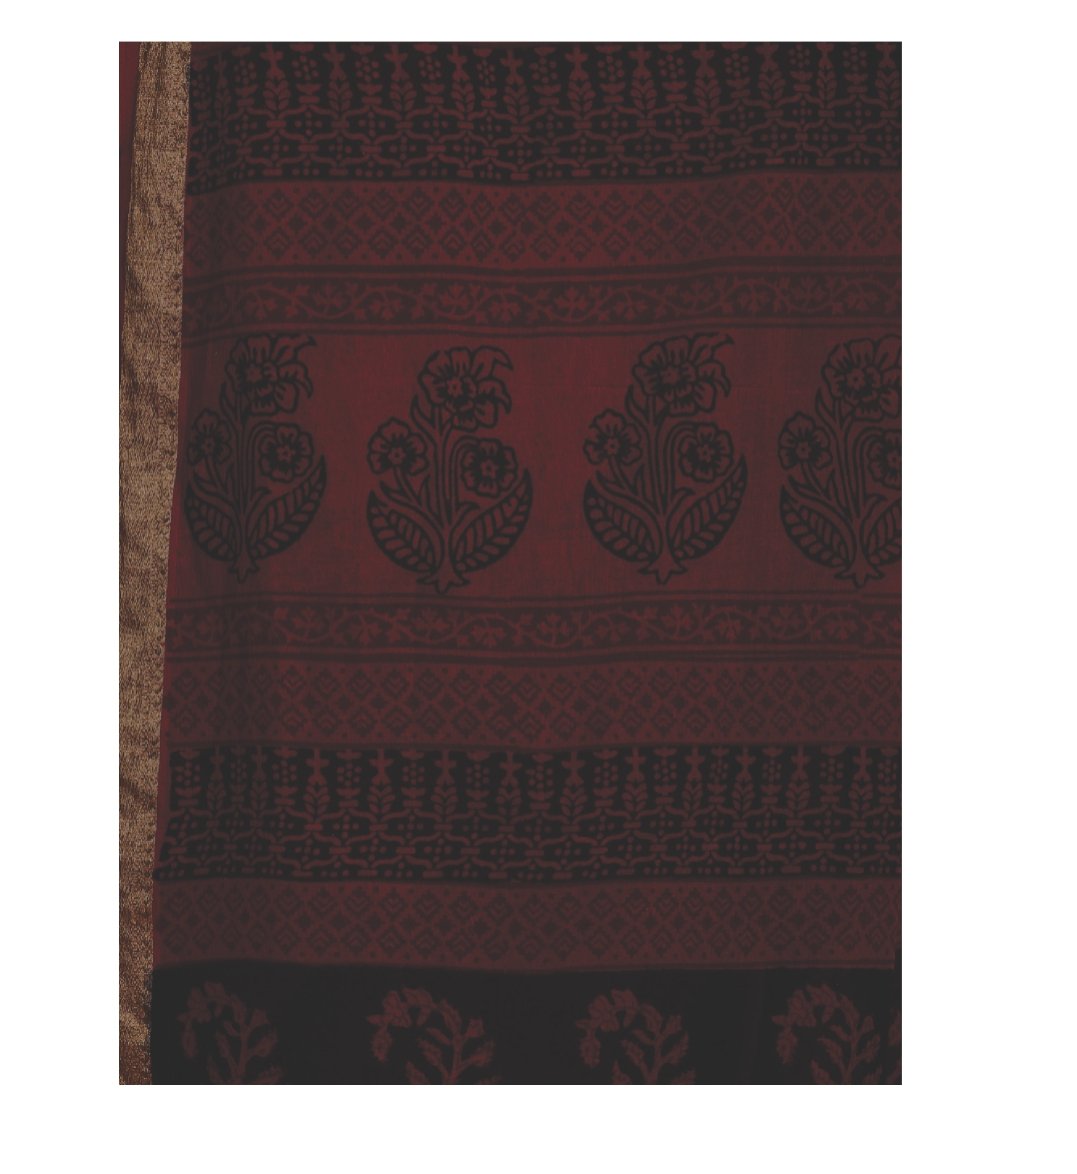 Maroon Cotton Hand Block Bagh Print Handcrafted Saree-Saree-Kalakari India-ZIBASA0071-Bagh, Cotton, Geographical Indication, Hand Blocks, Hand Crafted, Heritage Prints, Natural Dyes, Sarees, Sustainable Fabrics-[Linen,Ethnic,wear,Fashionista,Handloom,Handicraft,Indigo,blockprint,block,print,Cotton,Chanderi,Blue, latest,classy,party,bollywood,trendy,summer,style,traditional,formal,elegant,unique,style,hand,block,print, dabu,booti,gift,present,glamorous,affordable,collectible,Sari,Saree,printed, h